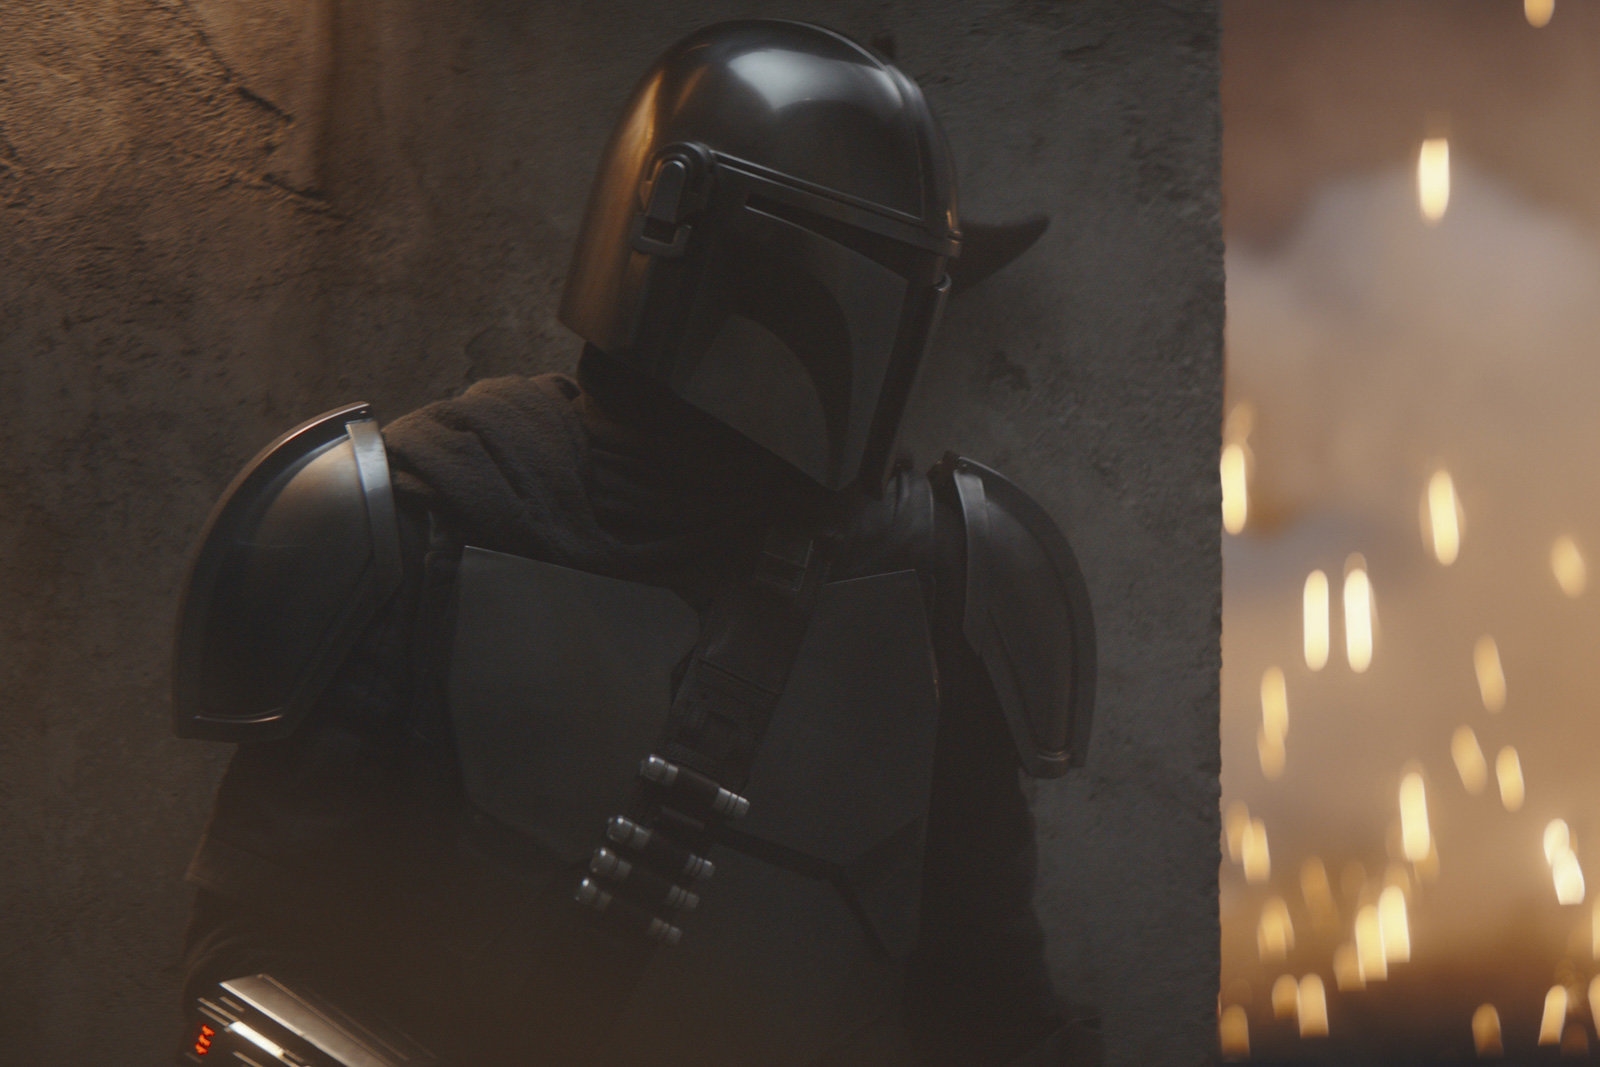 'The Mandalorian' returns with season two in fall 2020 | DeviceDaily.com